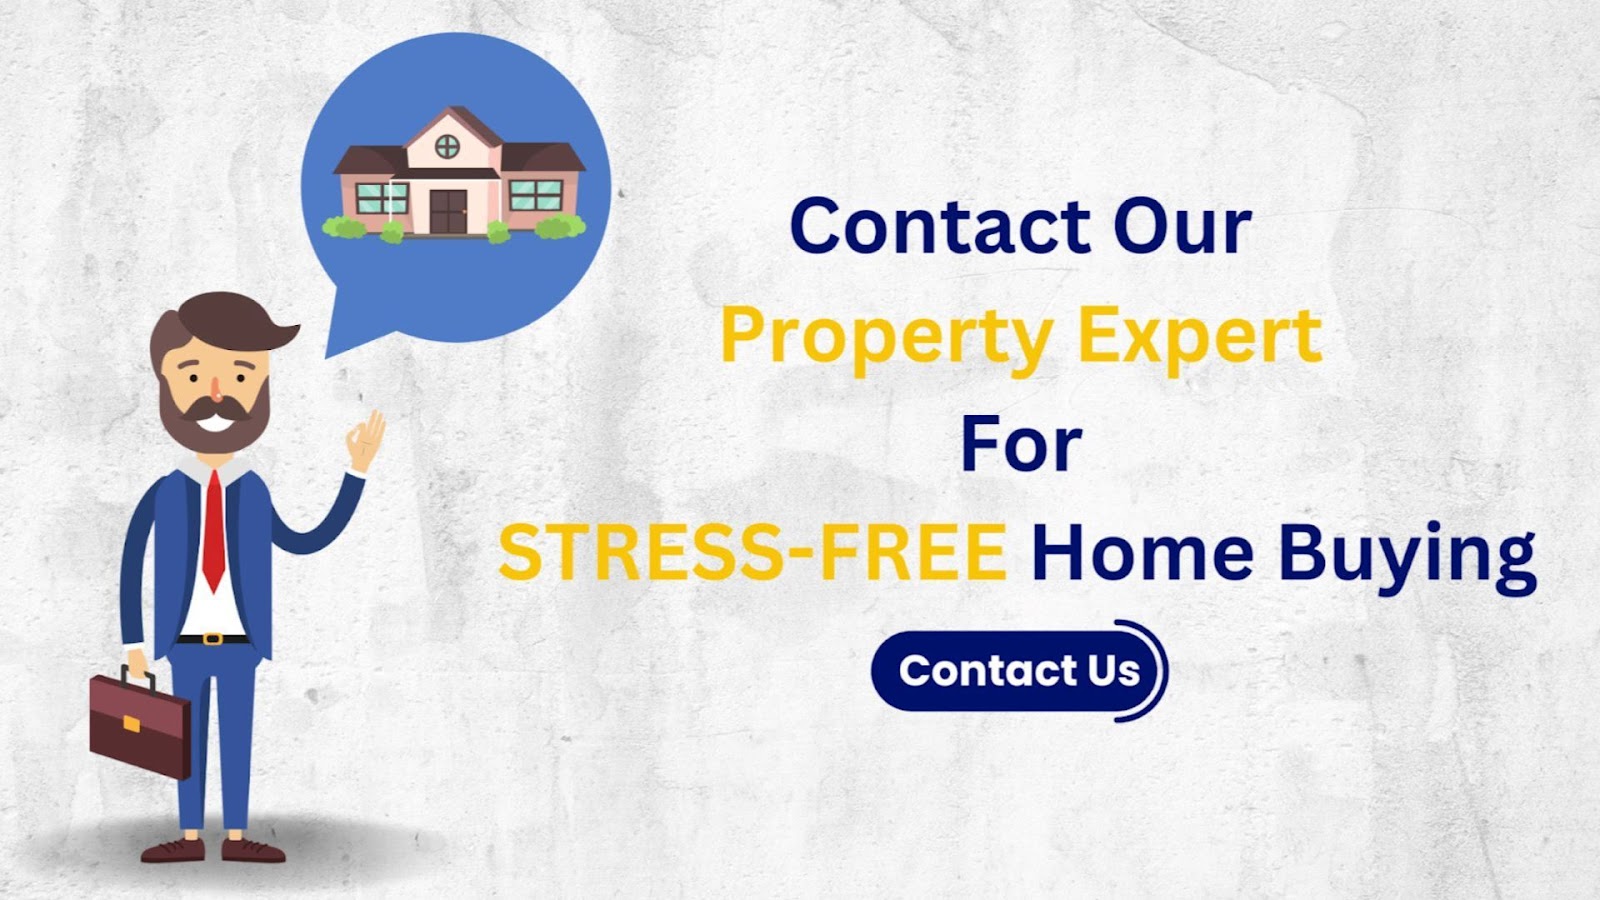 Contact the property expert at PropertyCloud to get guidance related to property buying and selling.